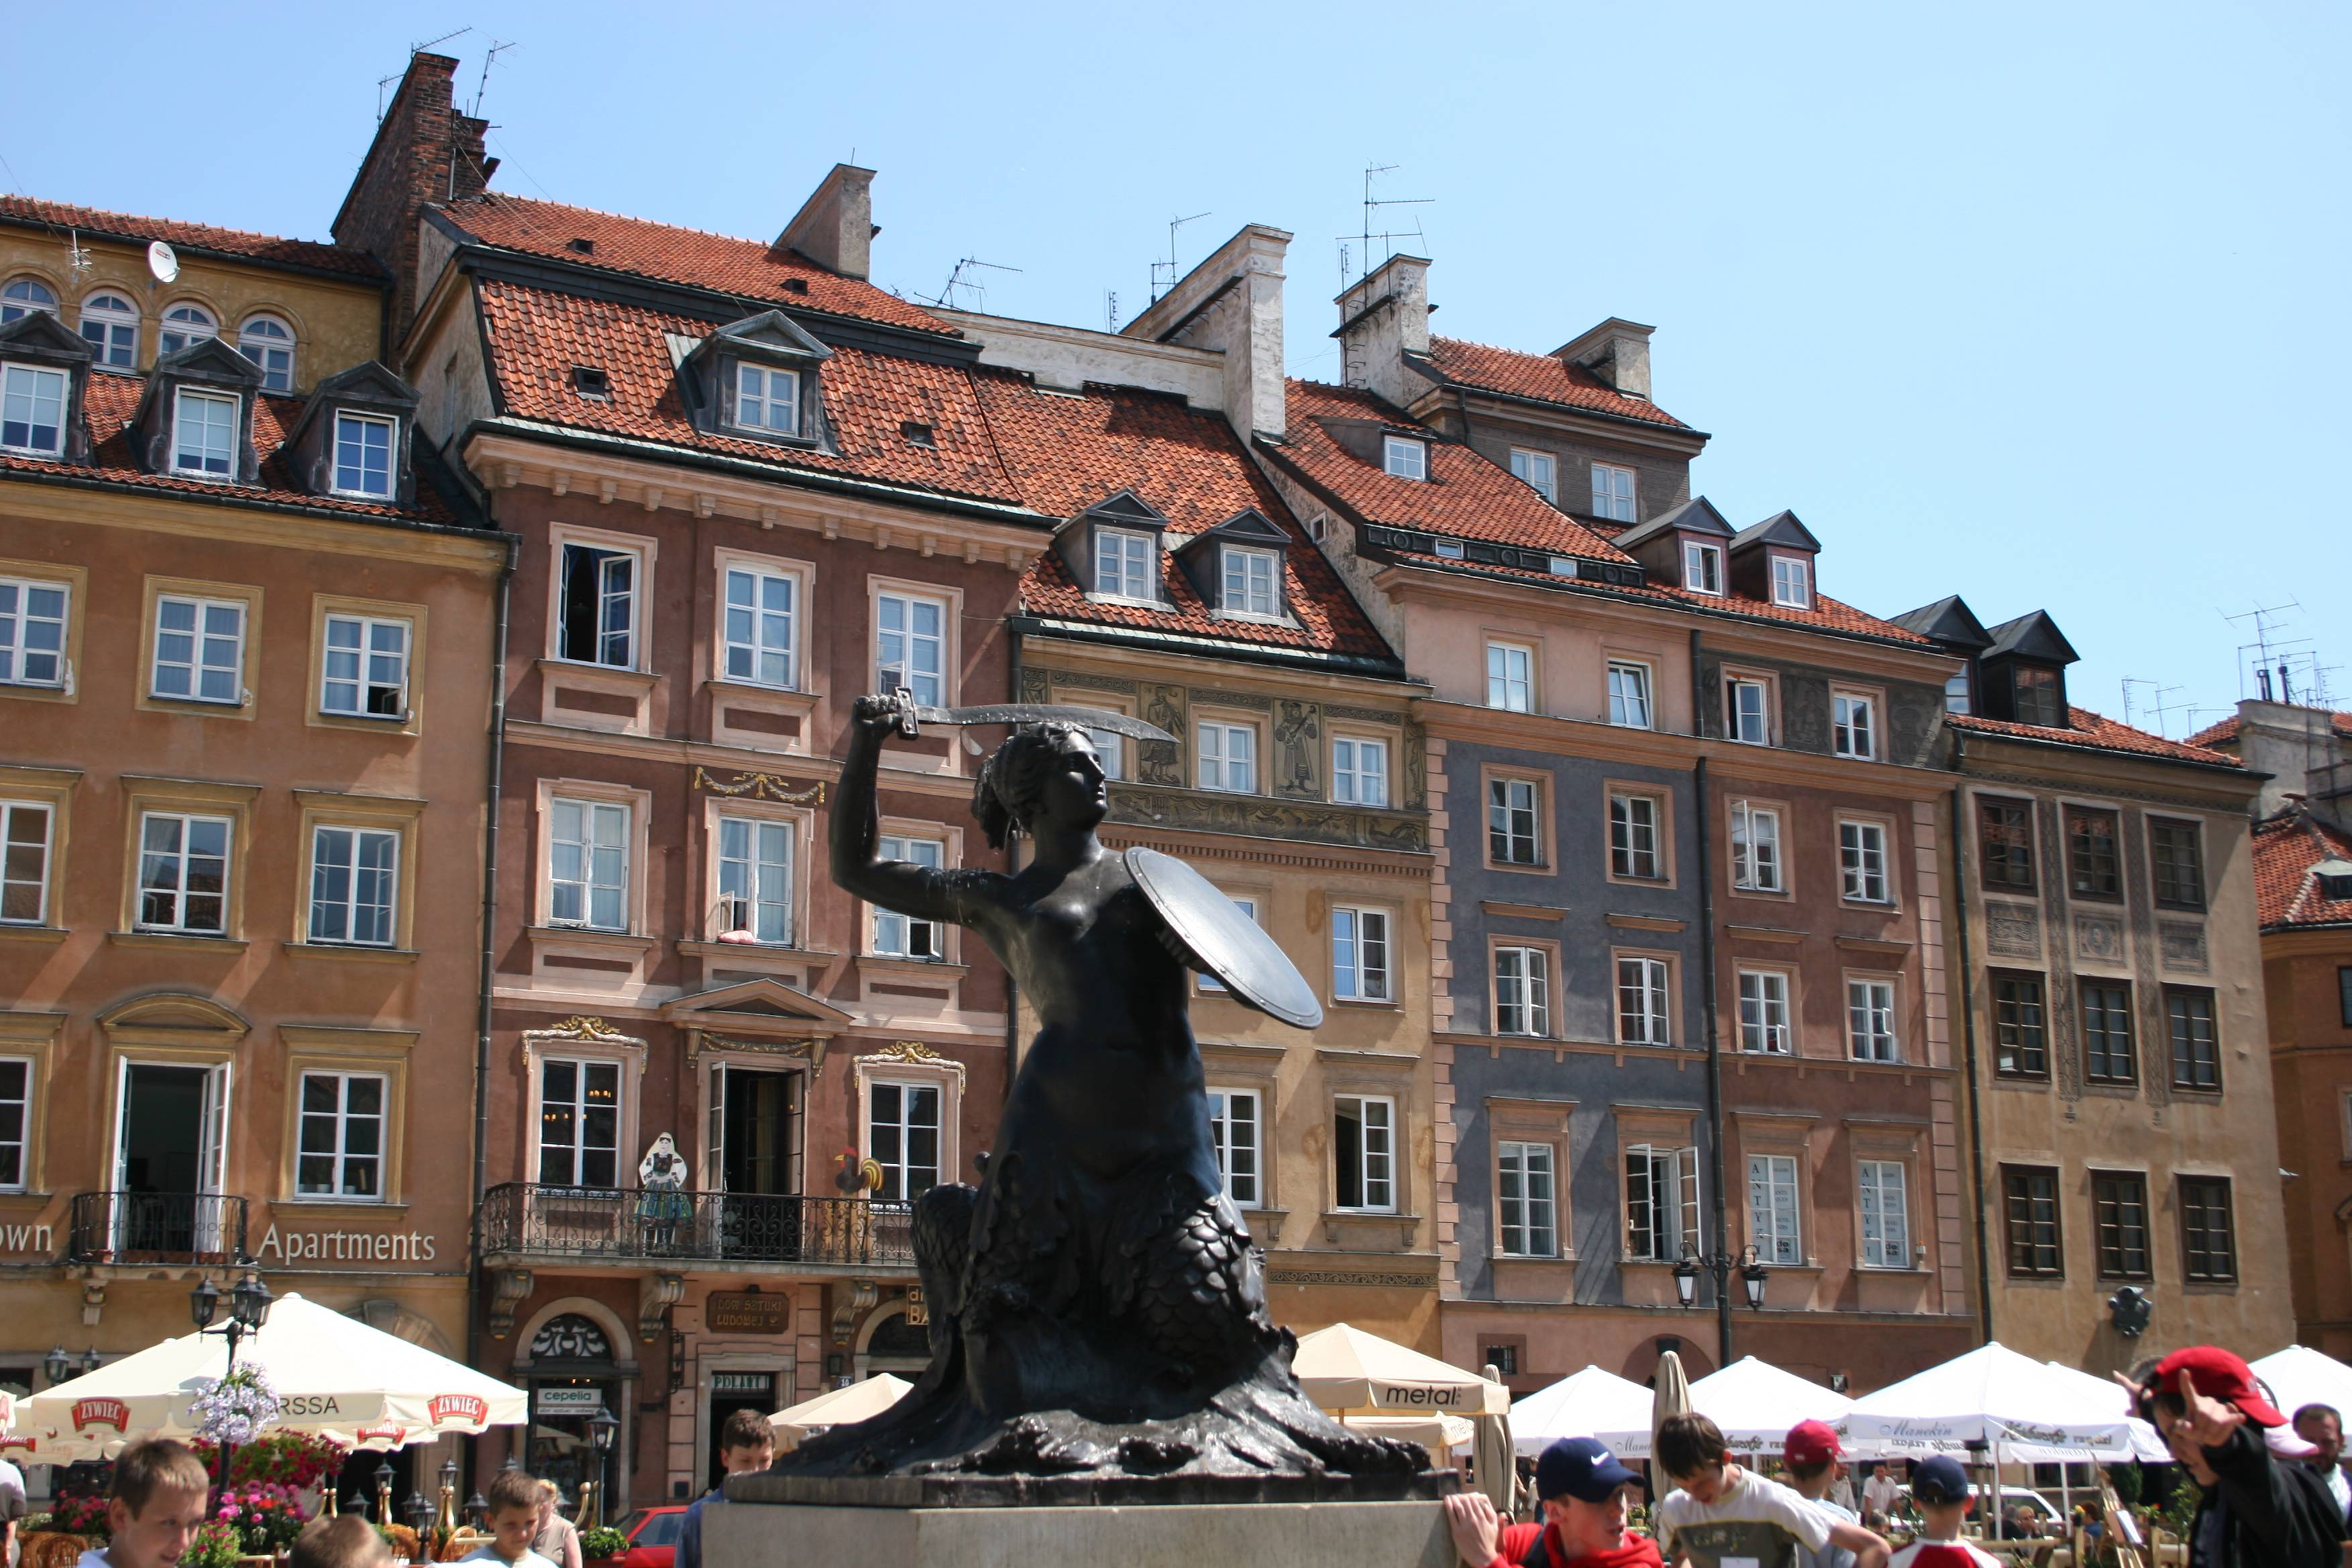 Warsaw Old Town Square and the Mermaid Monument